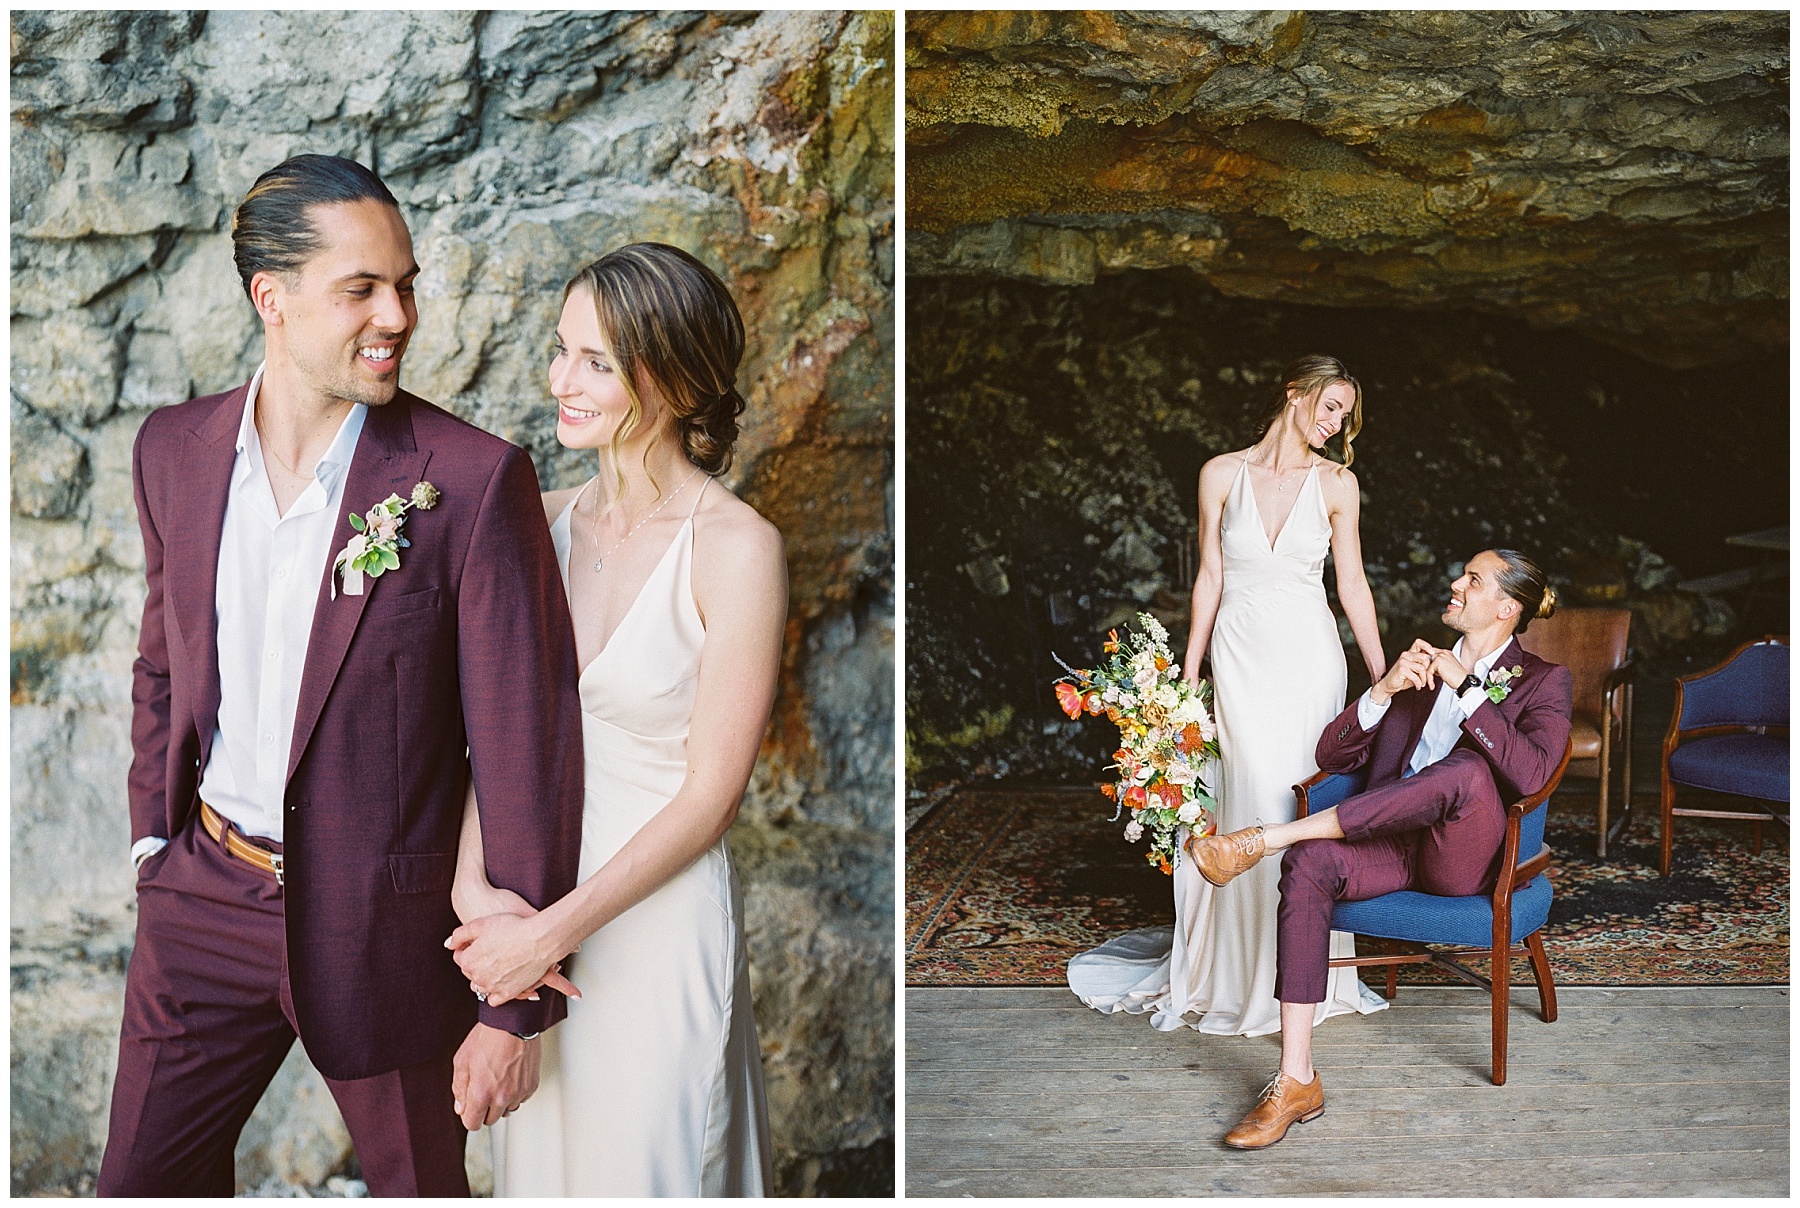 Intimate Spanish and French Inspired Destination Wedding with Lakeside Dinner Party at Dusk at Wildcliff by Kelsi Kliethermes Photography Best Missouri and Maui Wedding Photographer_0039.jpg